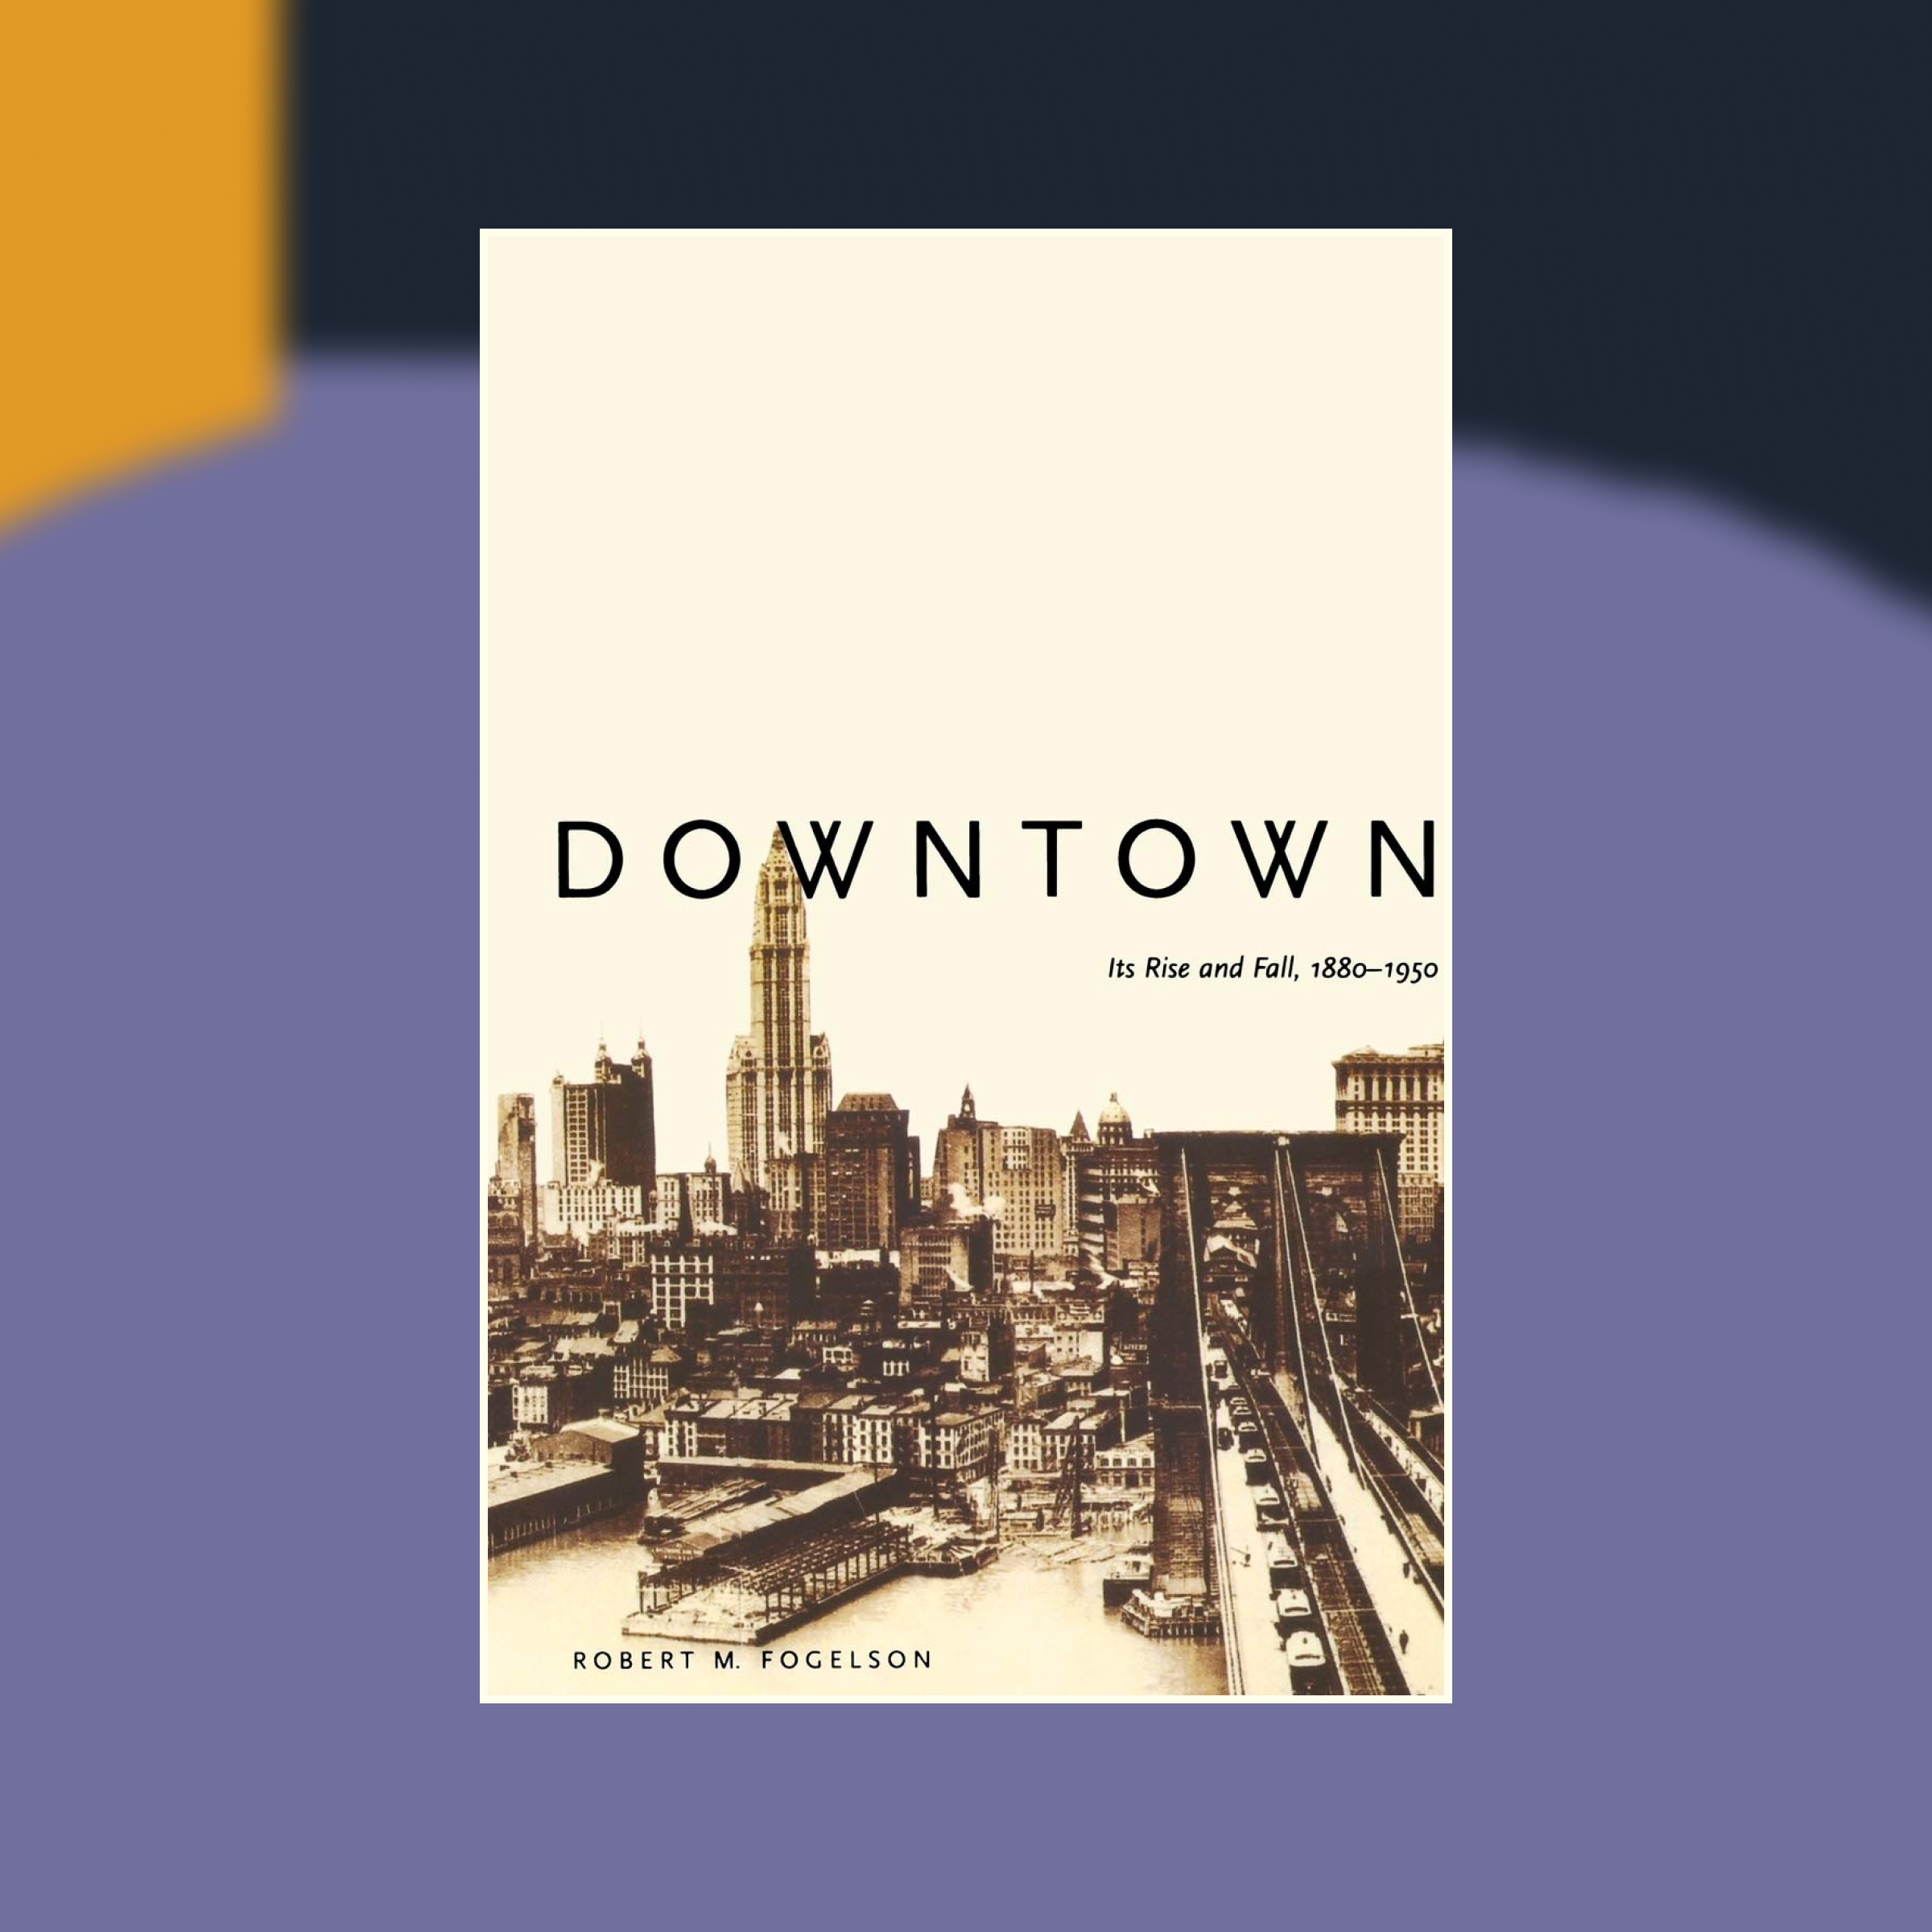 Book cover of Downtown against an abstract painted background